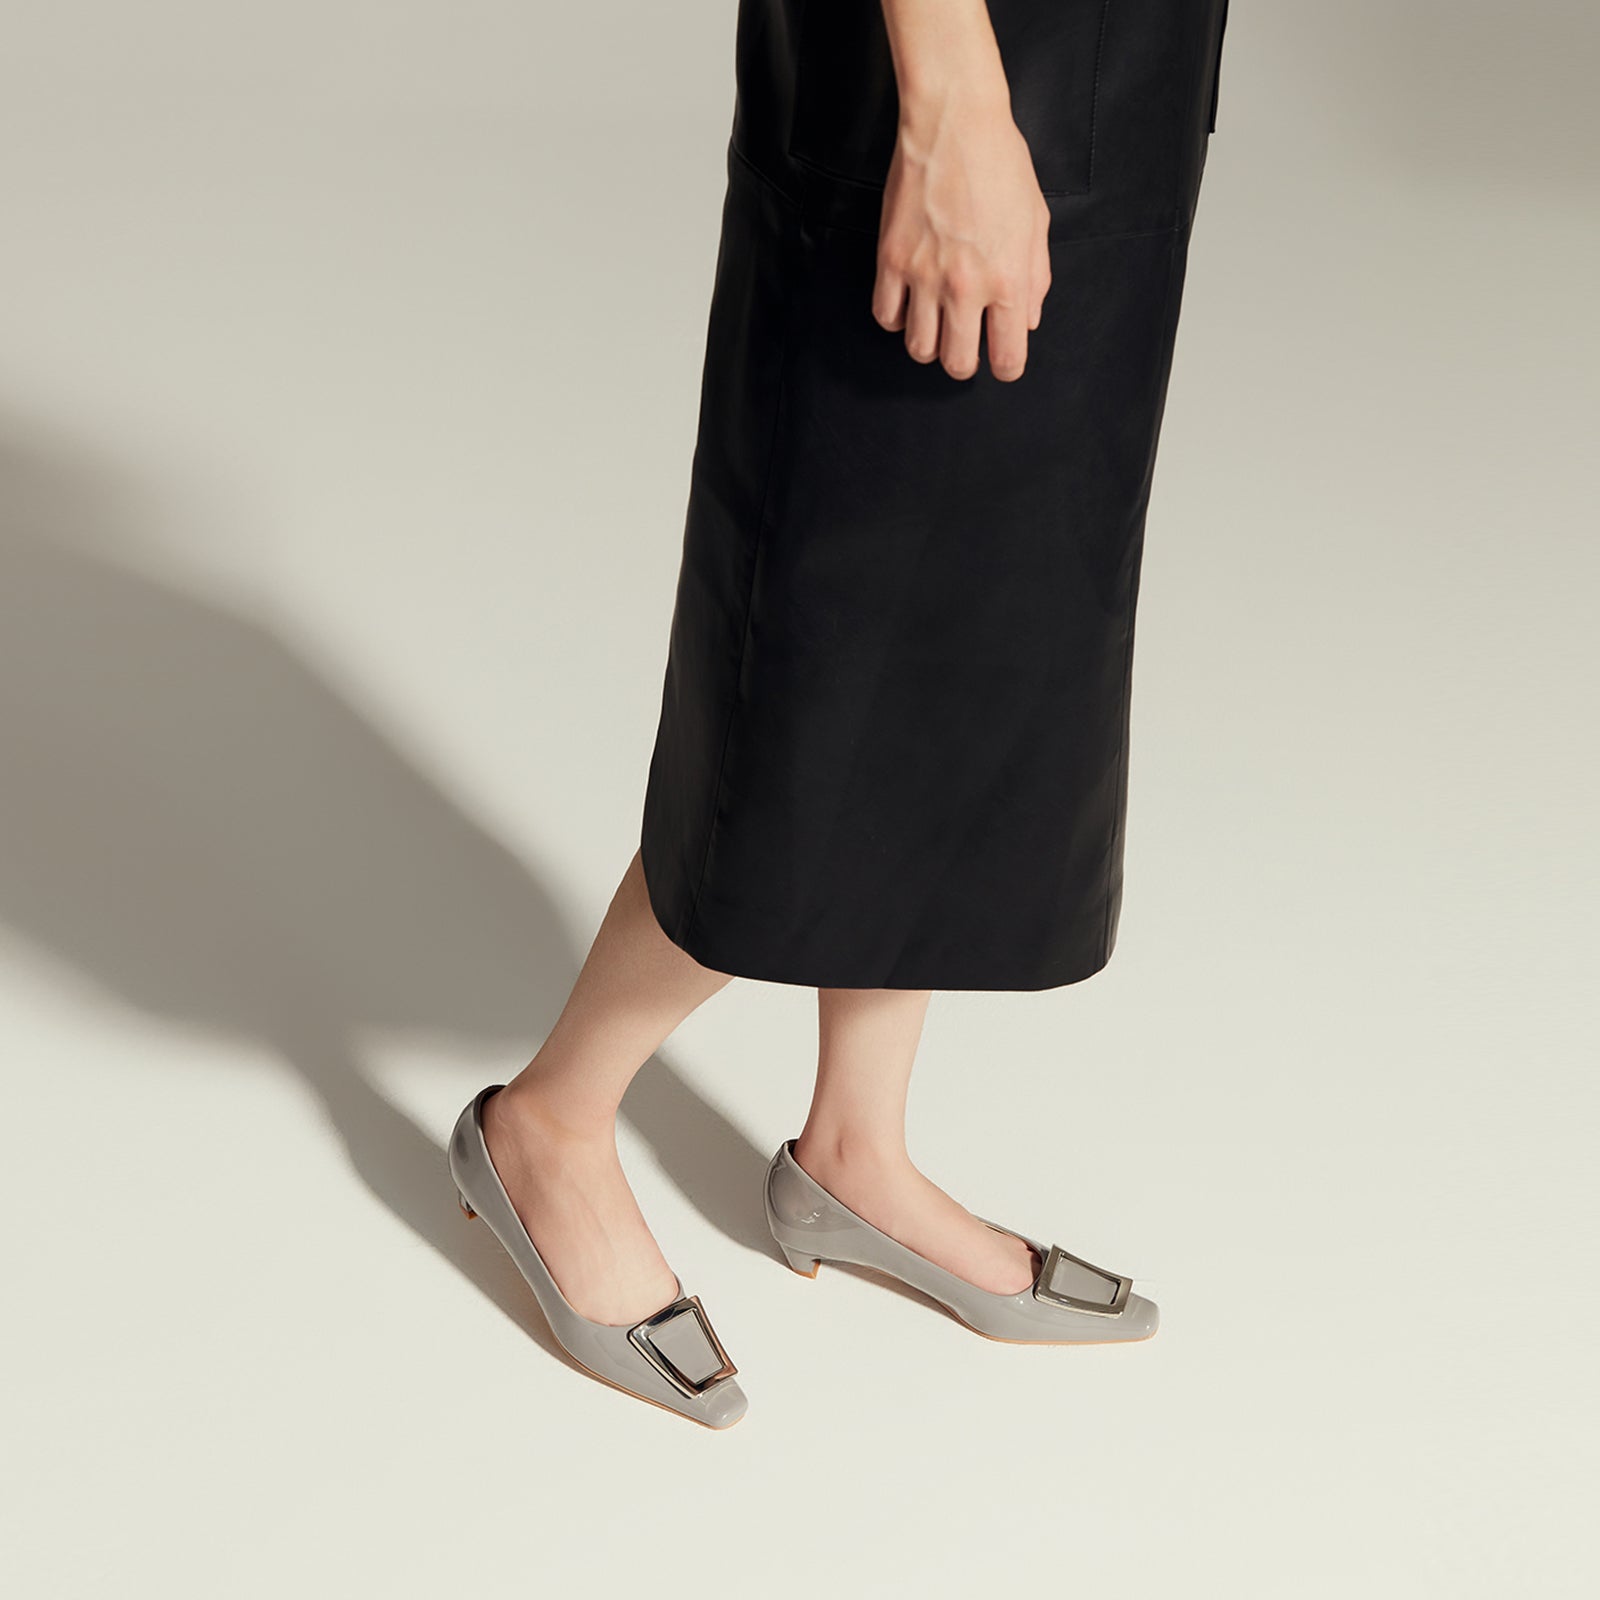 Grey Trapezoidal Buckle Low Heels, a modern and edgy choice for city living with a touch of sophistication